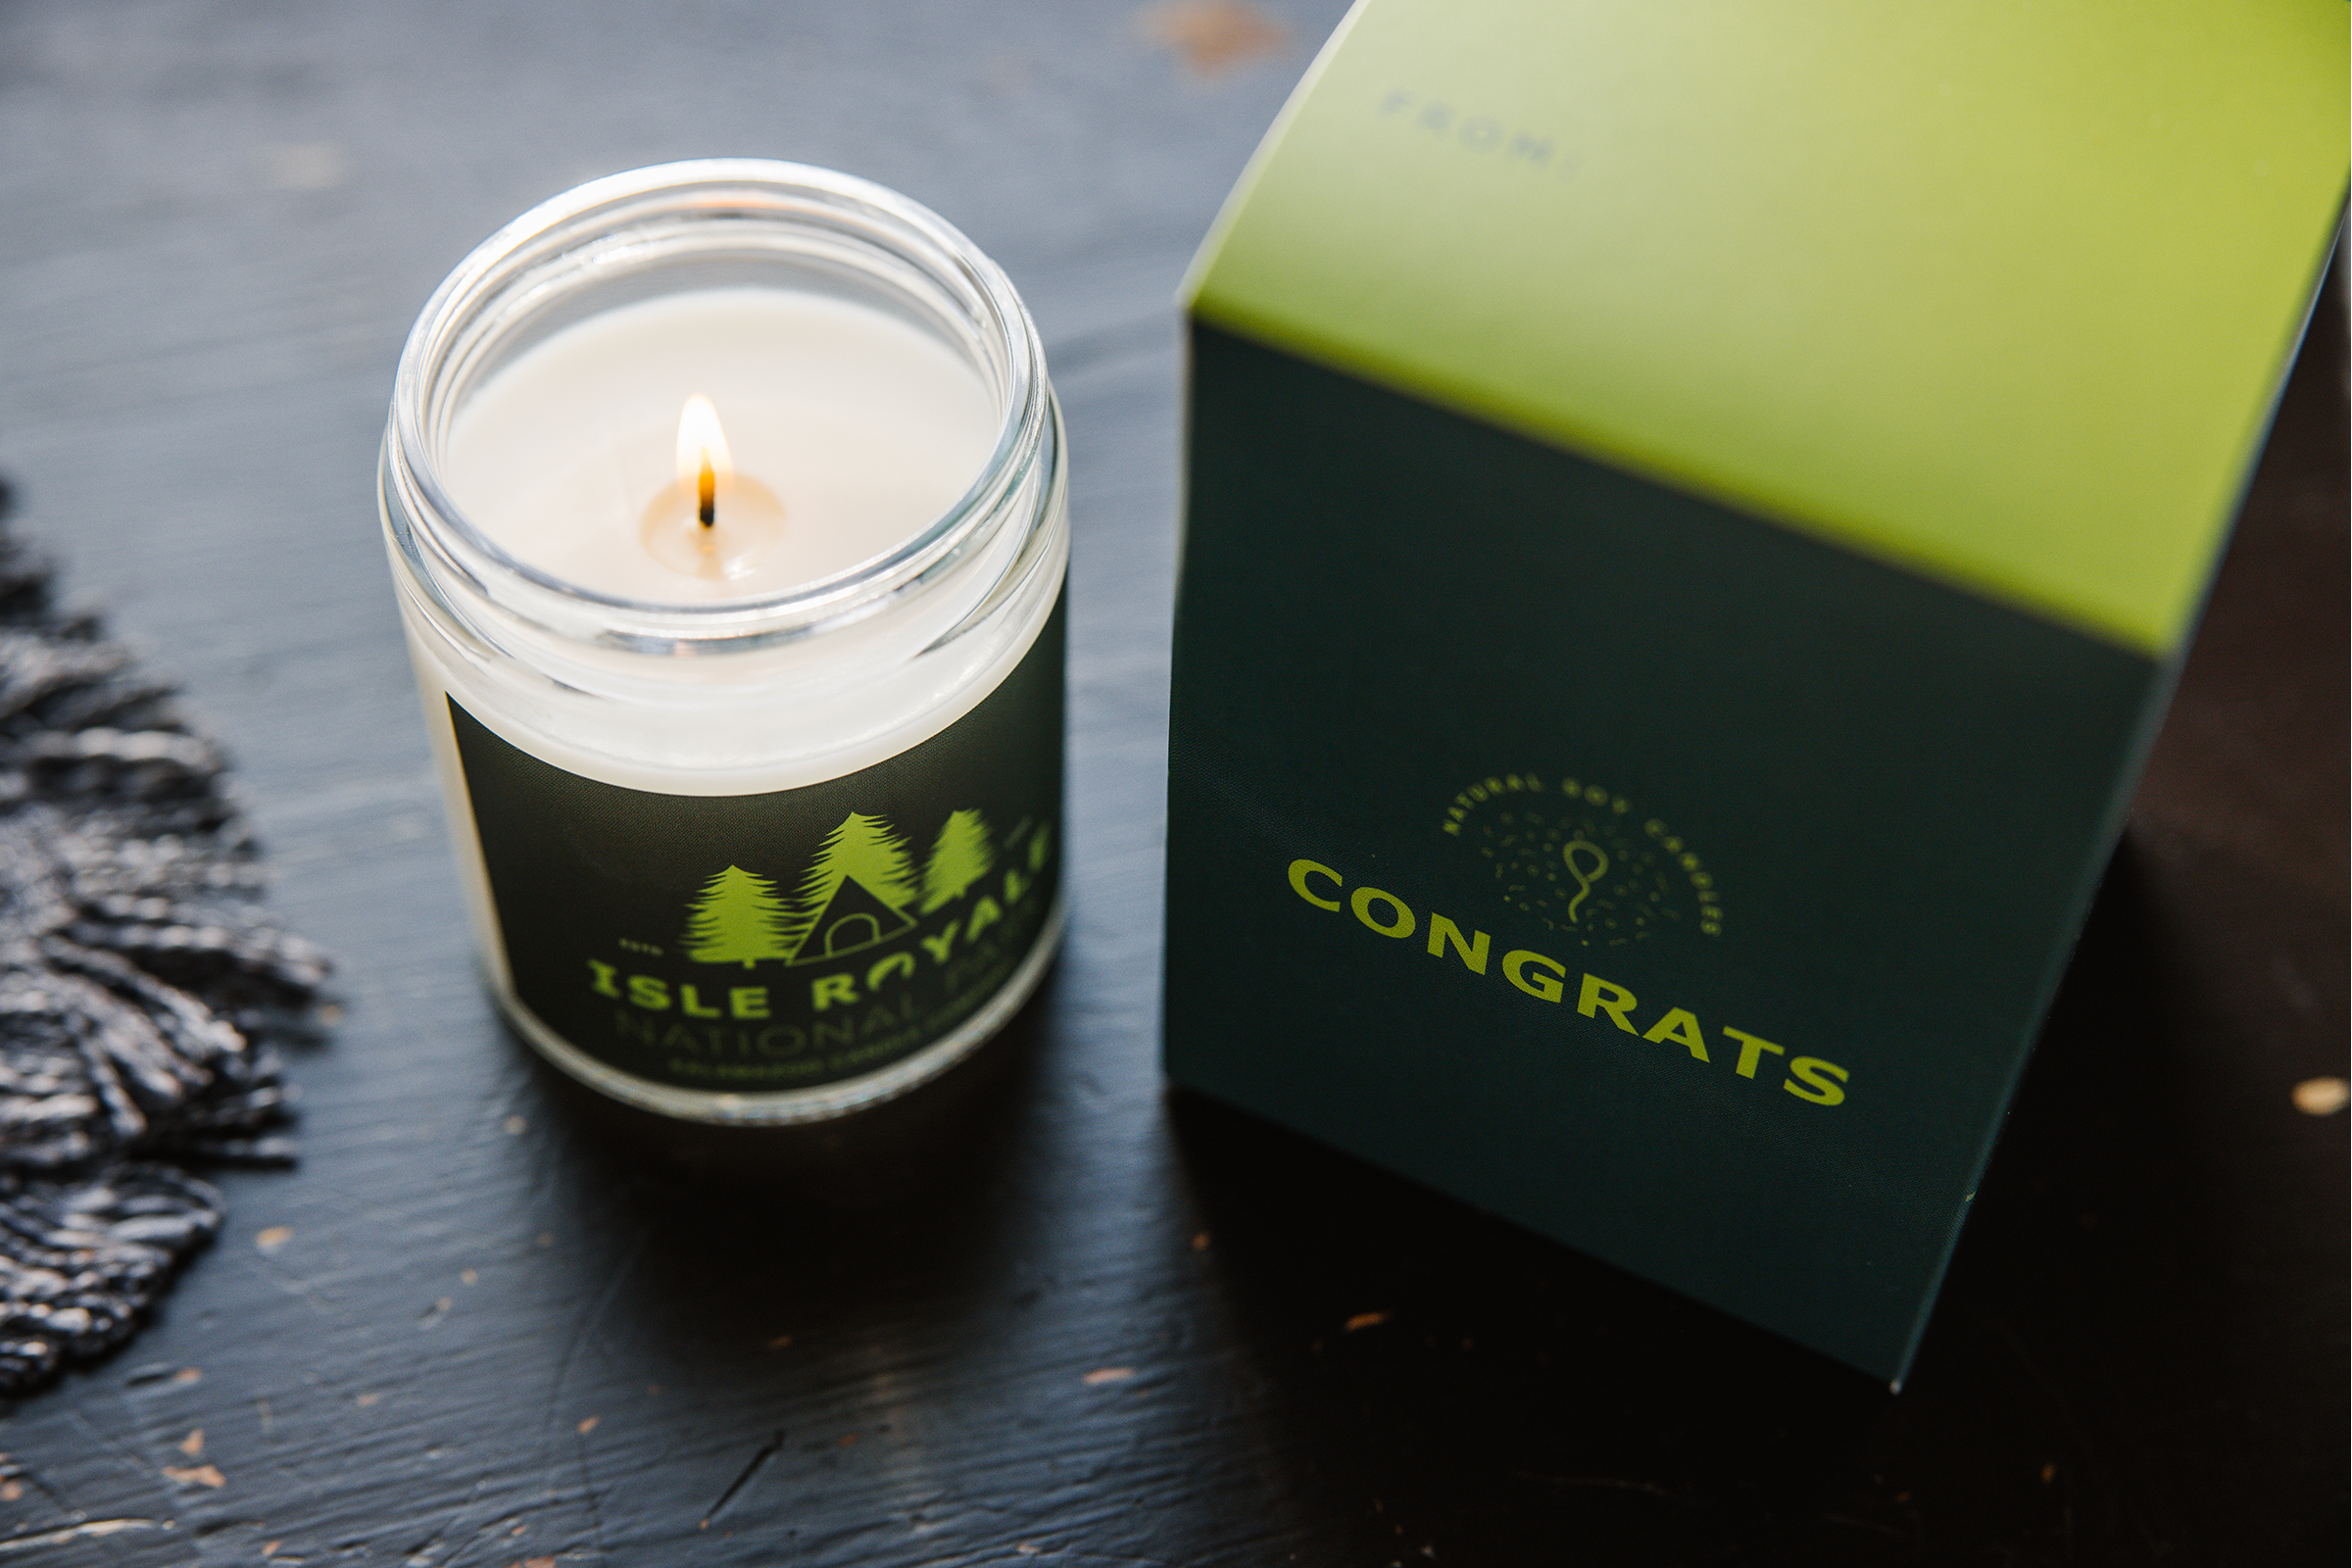 An Isle Royale Candle next to a Congrats Box